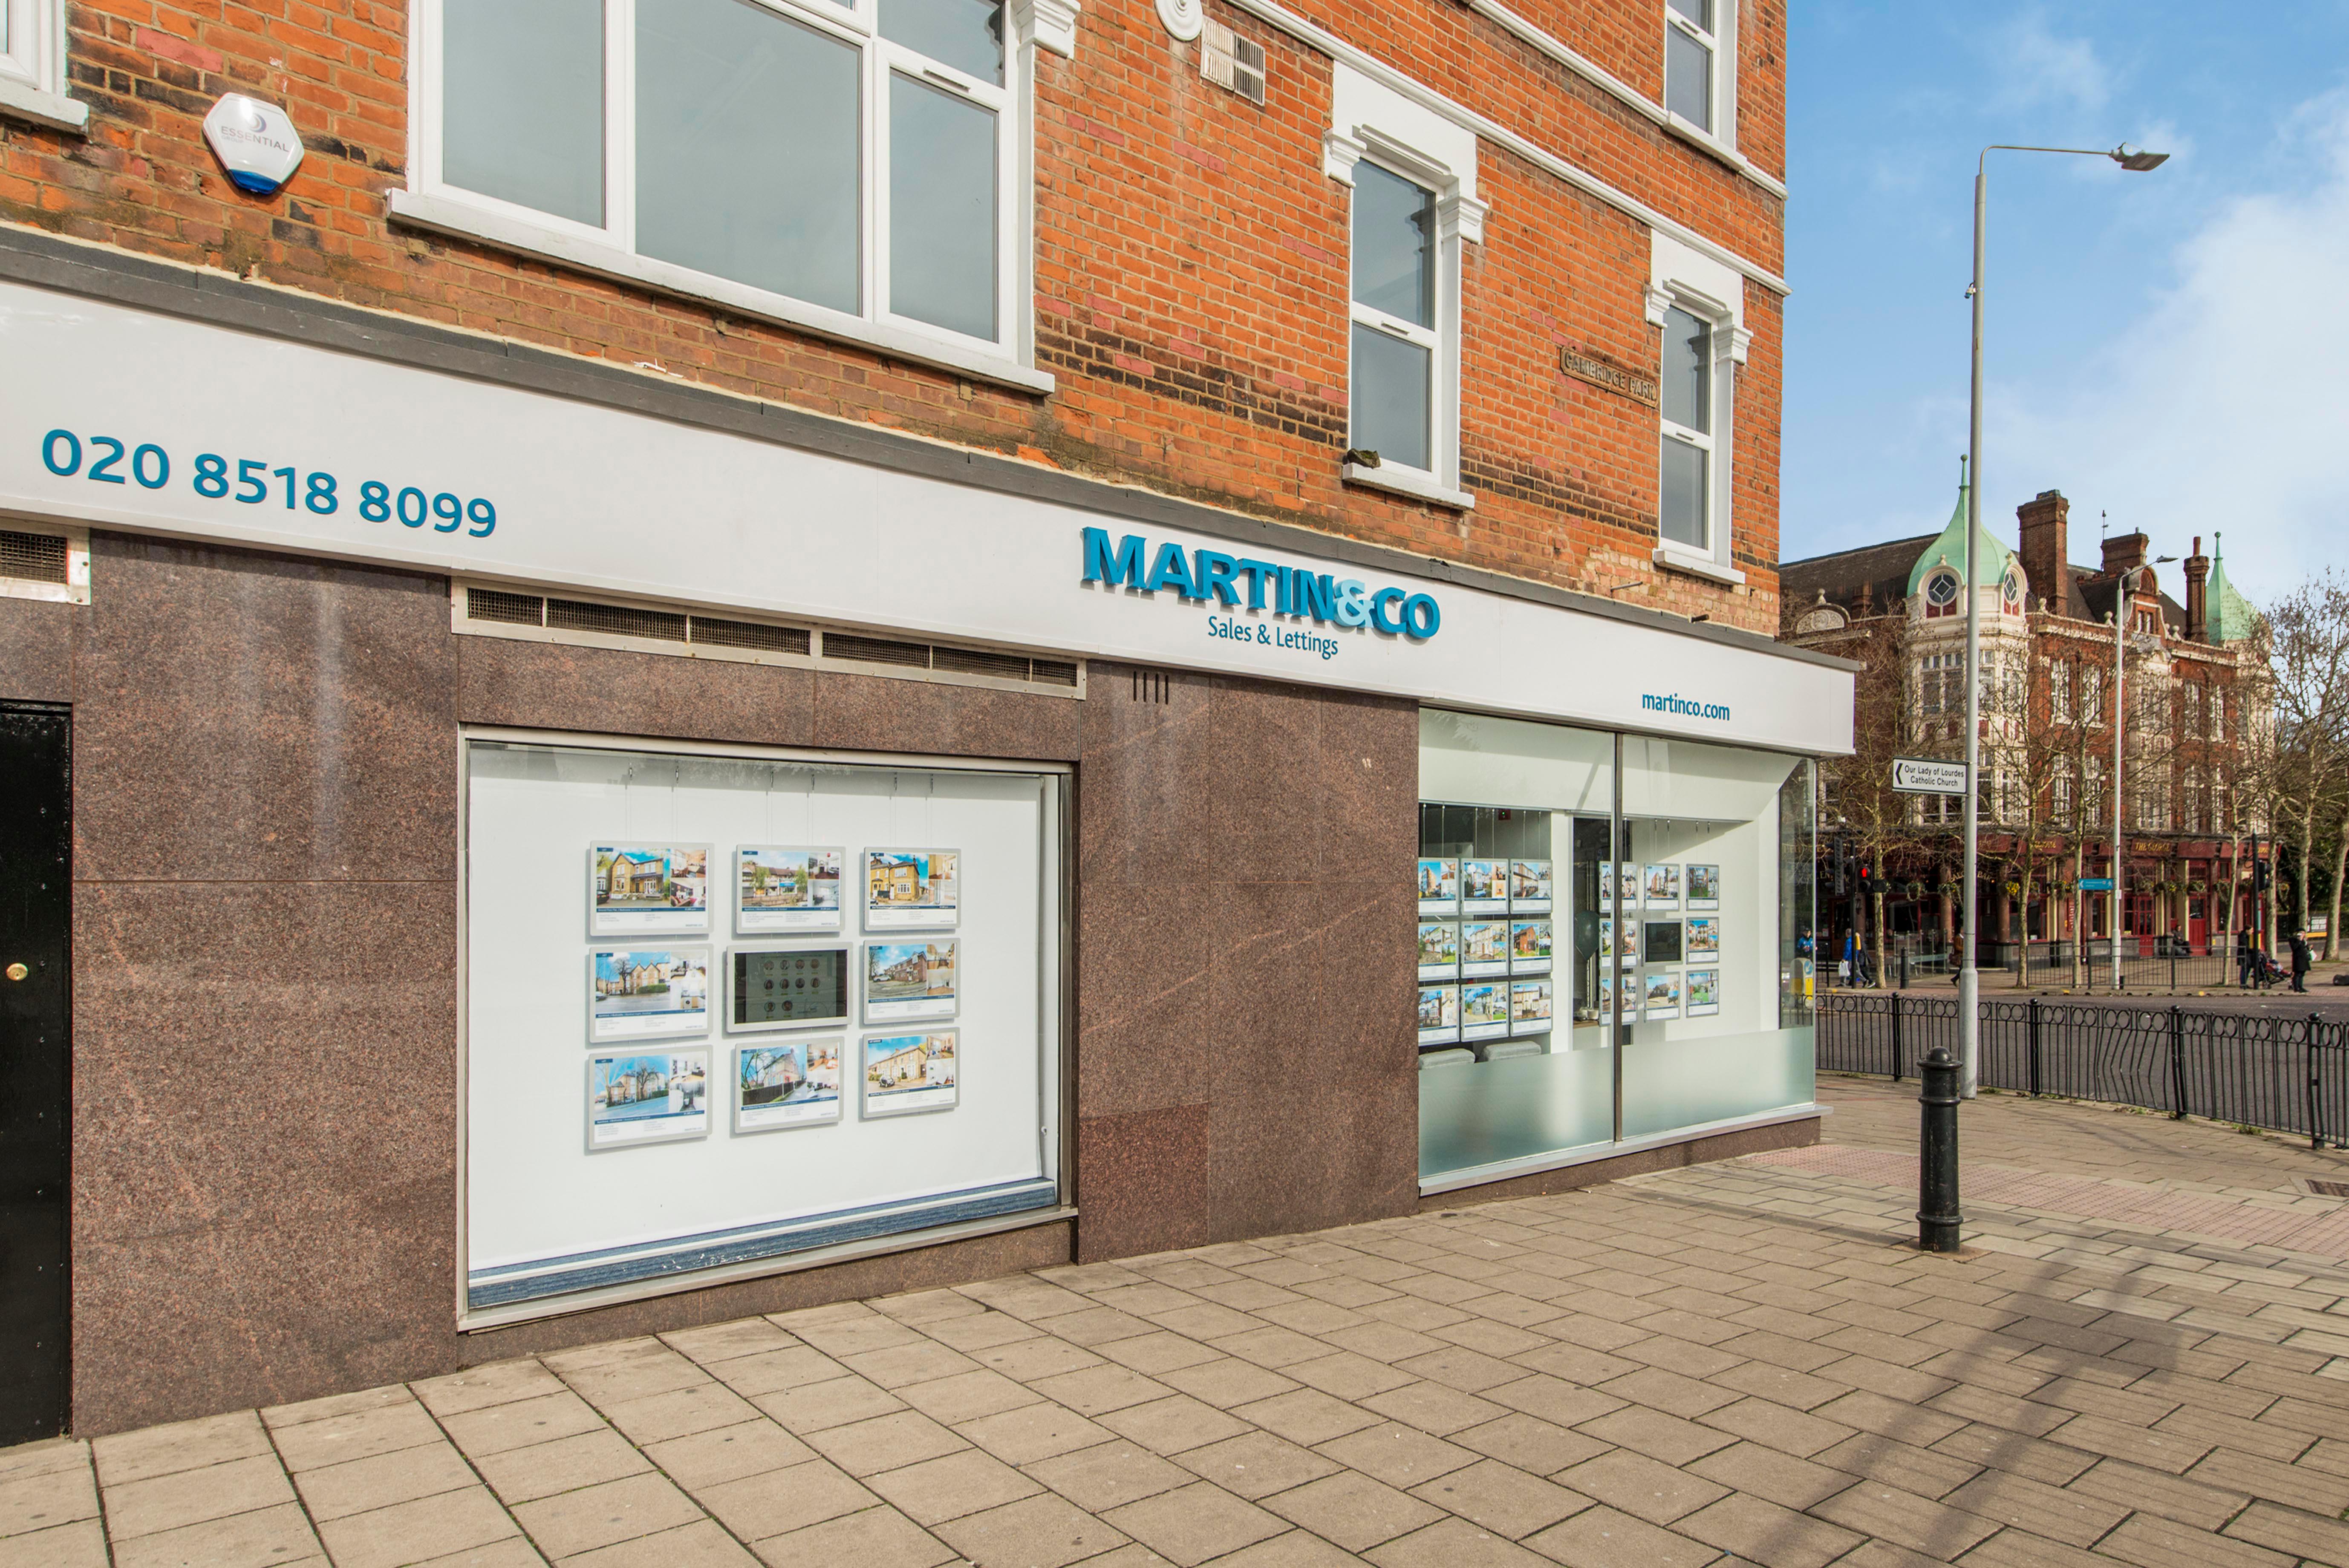 Images Martin & Co Wanstead Lettings & Estate Agents